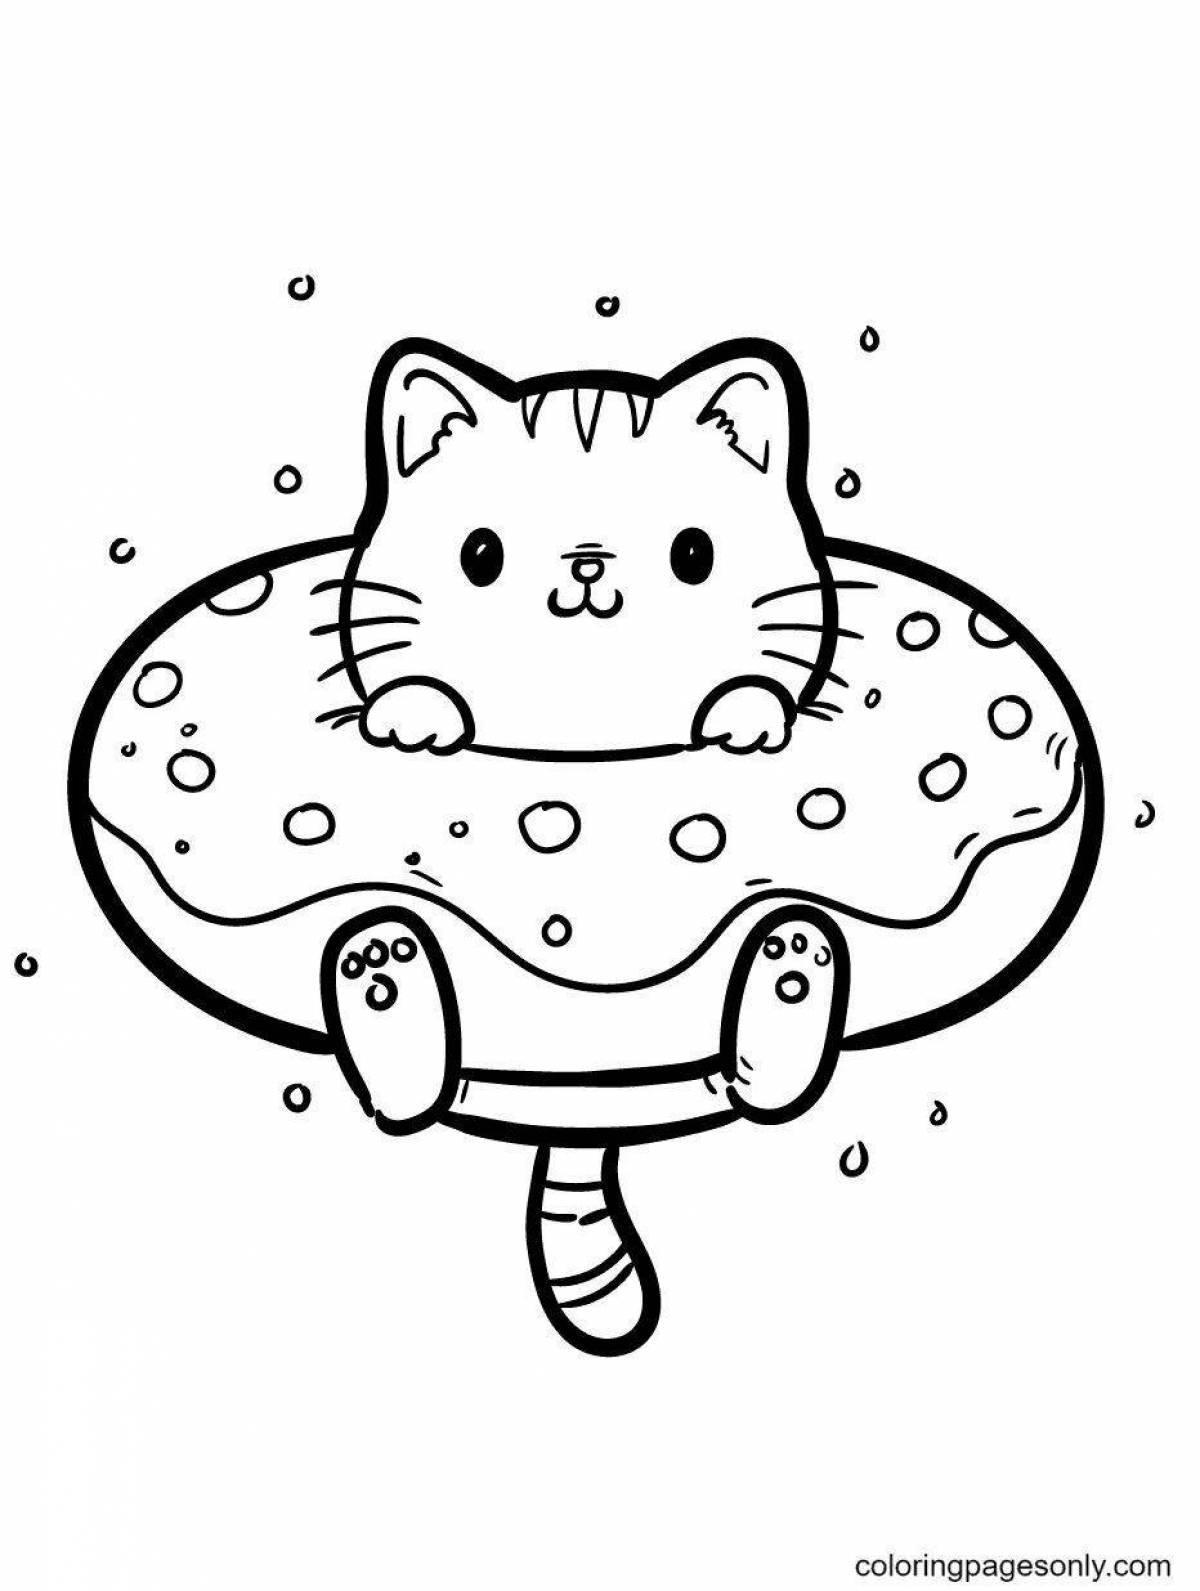 Coloring book smiling cat in a cup